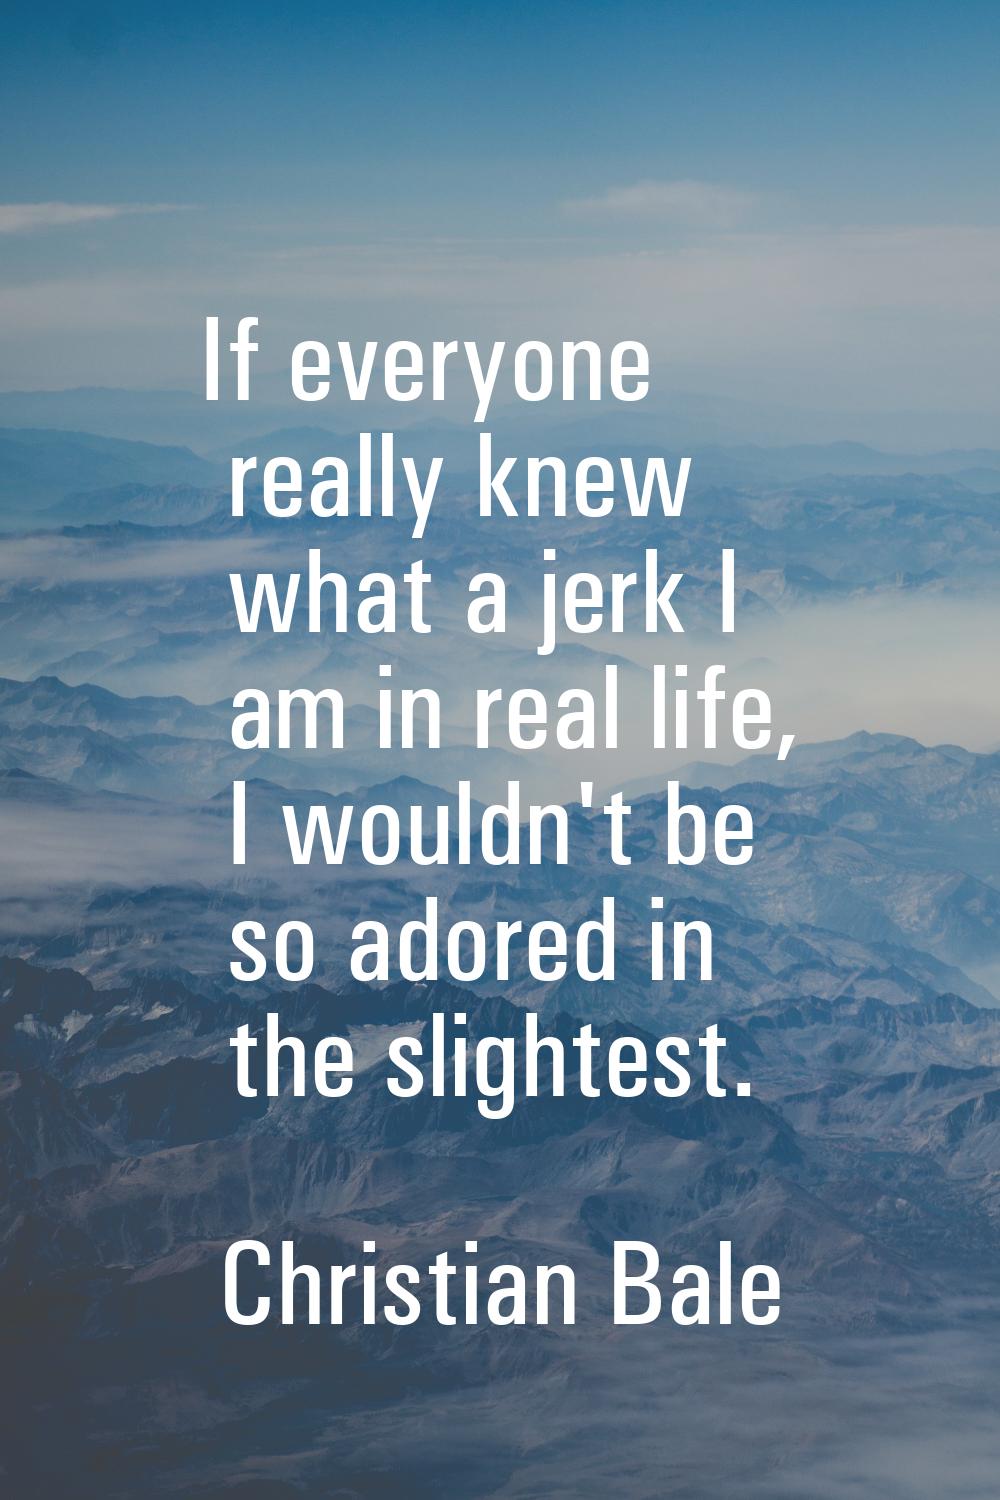 If everyone really knew what a jerk I am in real life, I wouldn't be so adored in the slightest.